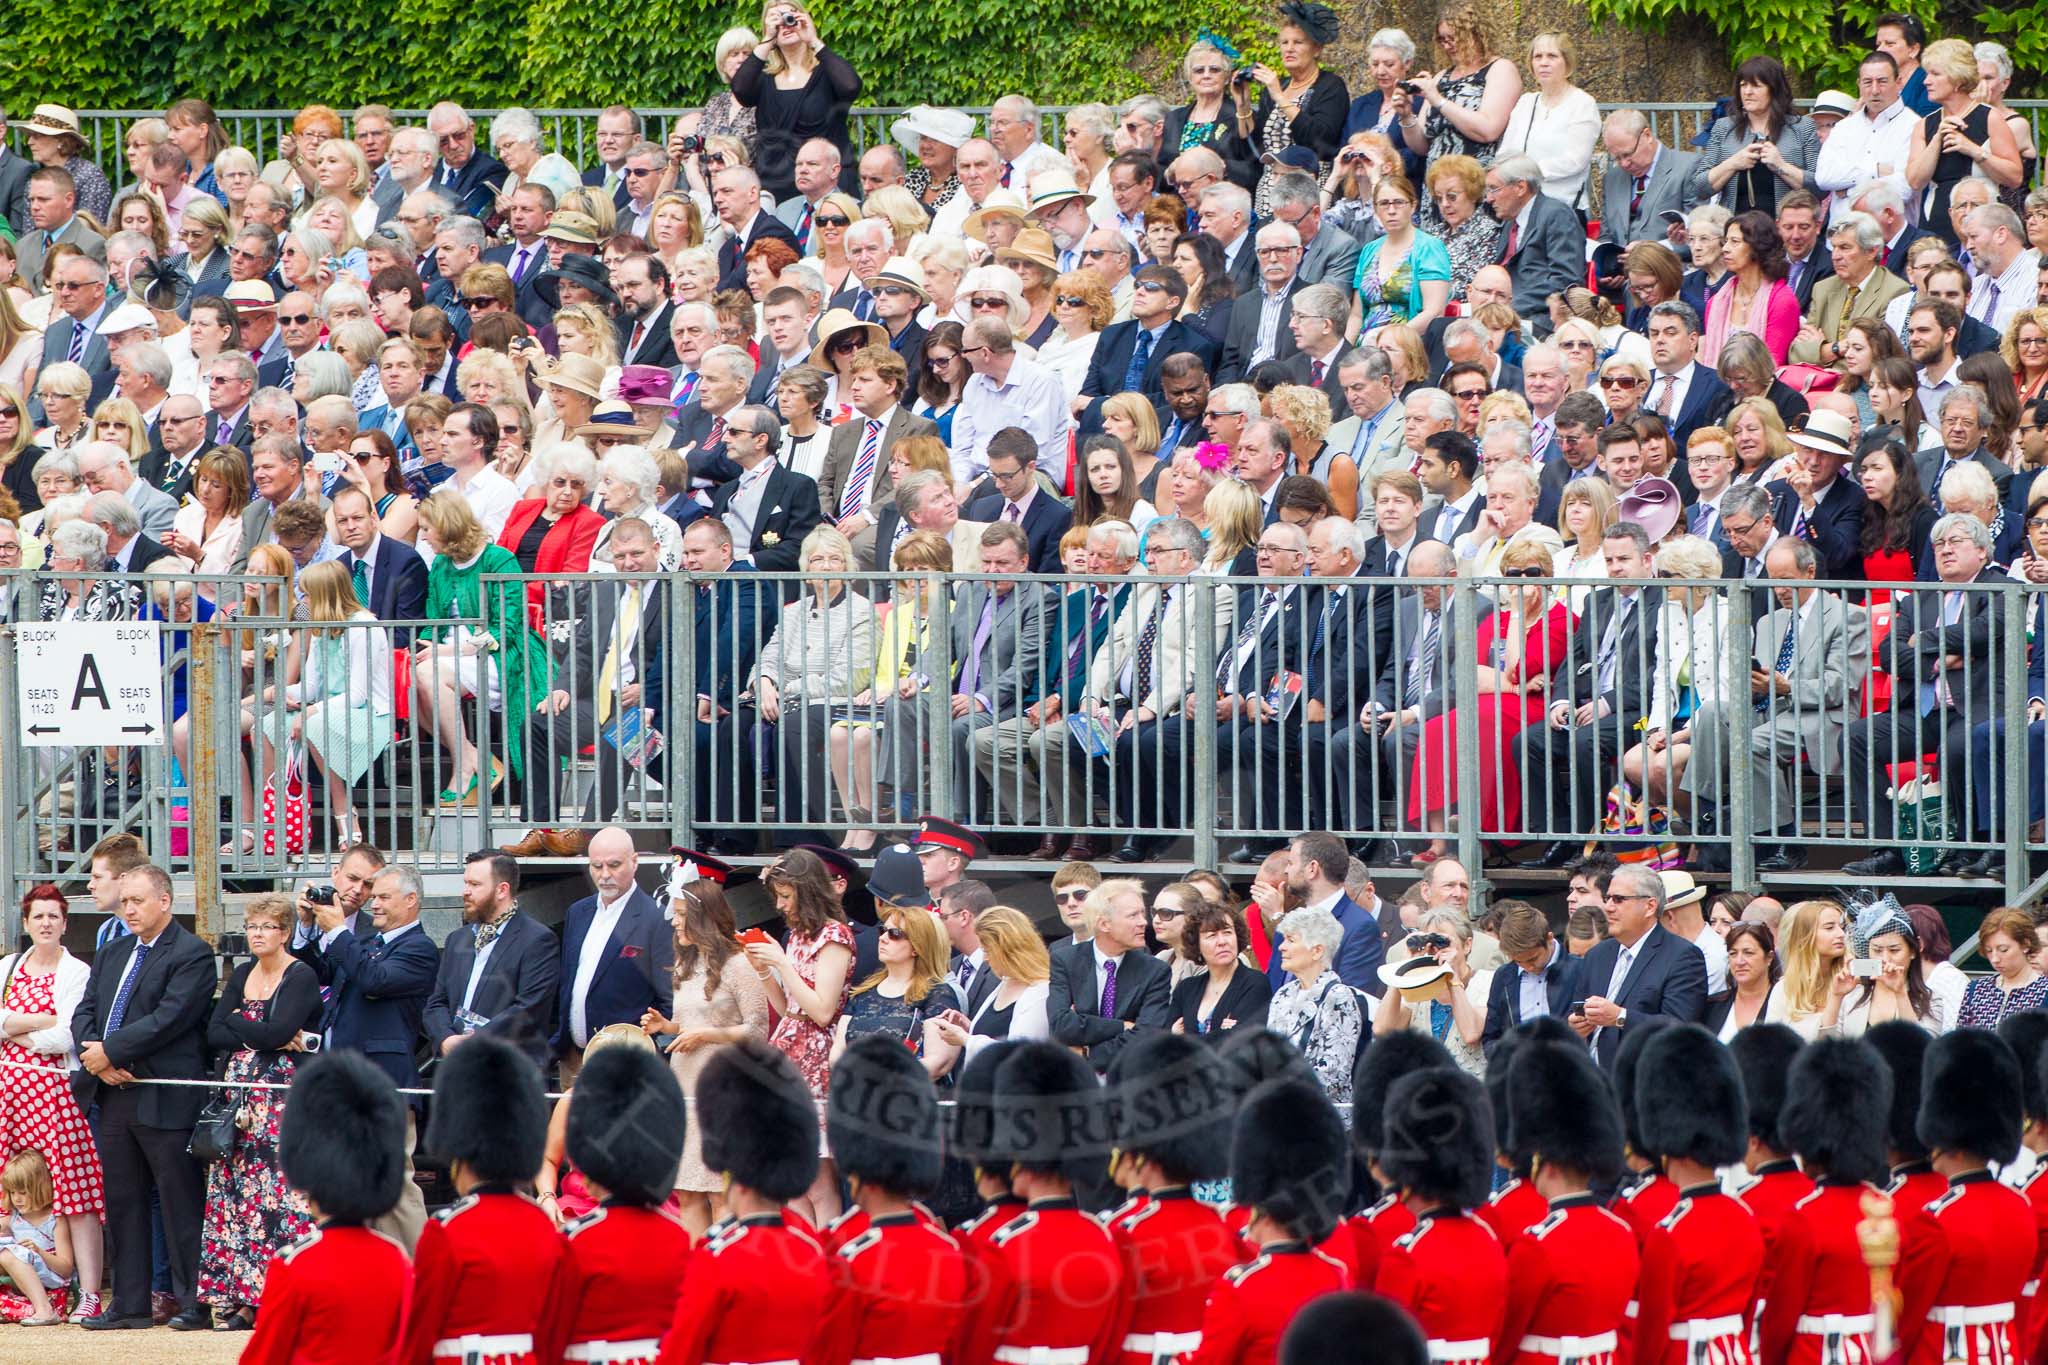 Trooping the Colour 2014.
Horse Guards Parade, Westminster,
London SW1A,

United Kingdom,
on 14 June 2014 at 10:34, image #215